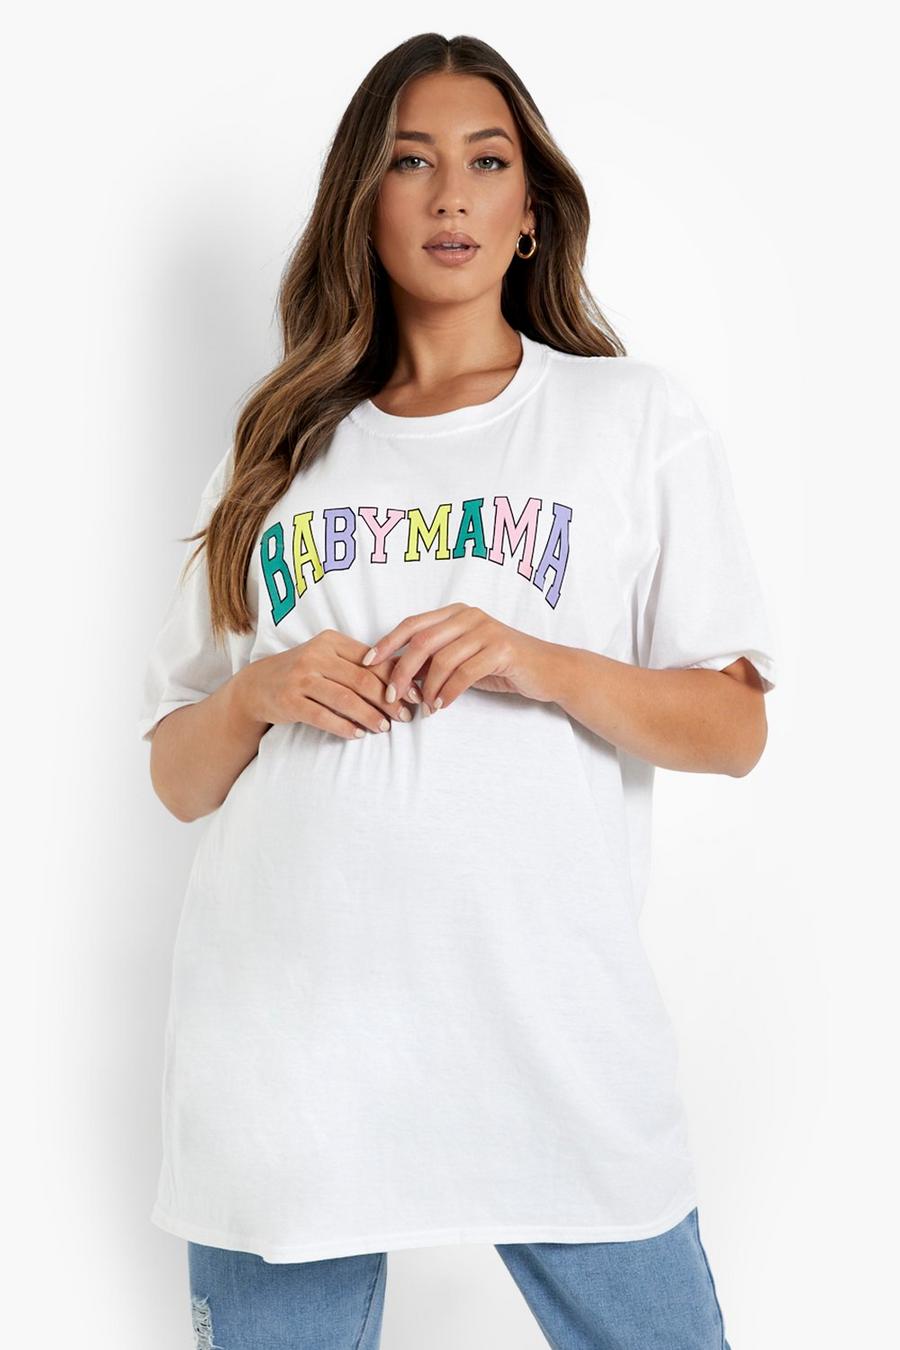 T-Shirt Premaman in stile Varsity con stampa "Baby Mama", White image number 1